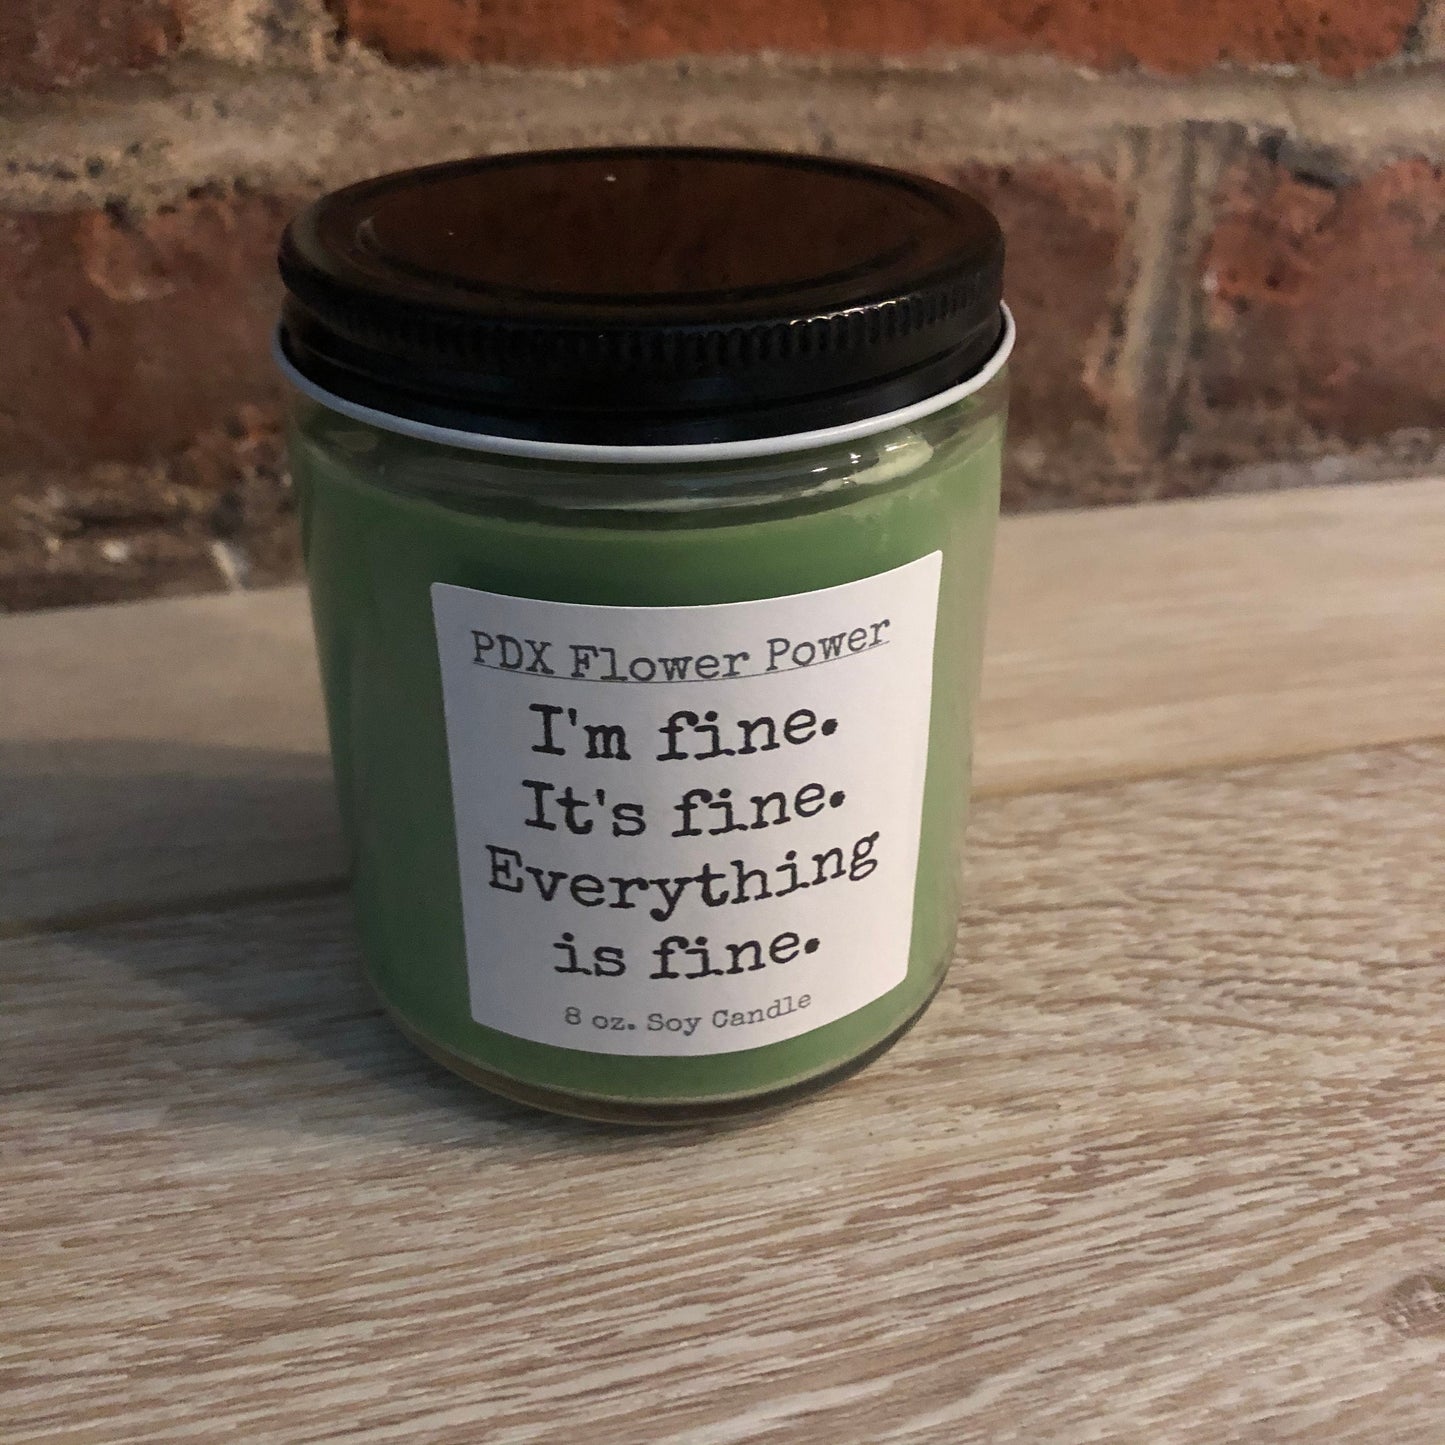 PDX Flower Power " I'm fine, it's fine, everything is fine!" handcrafted soy candle